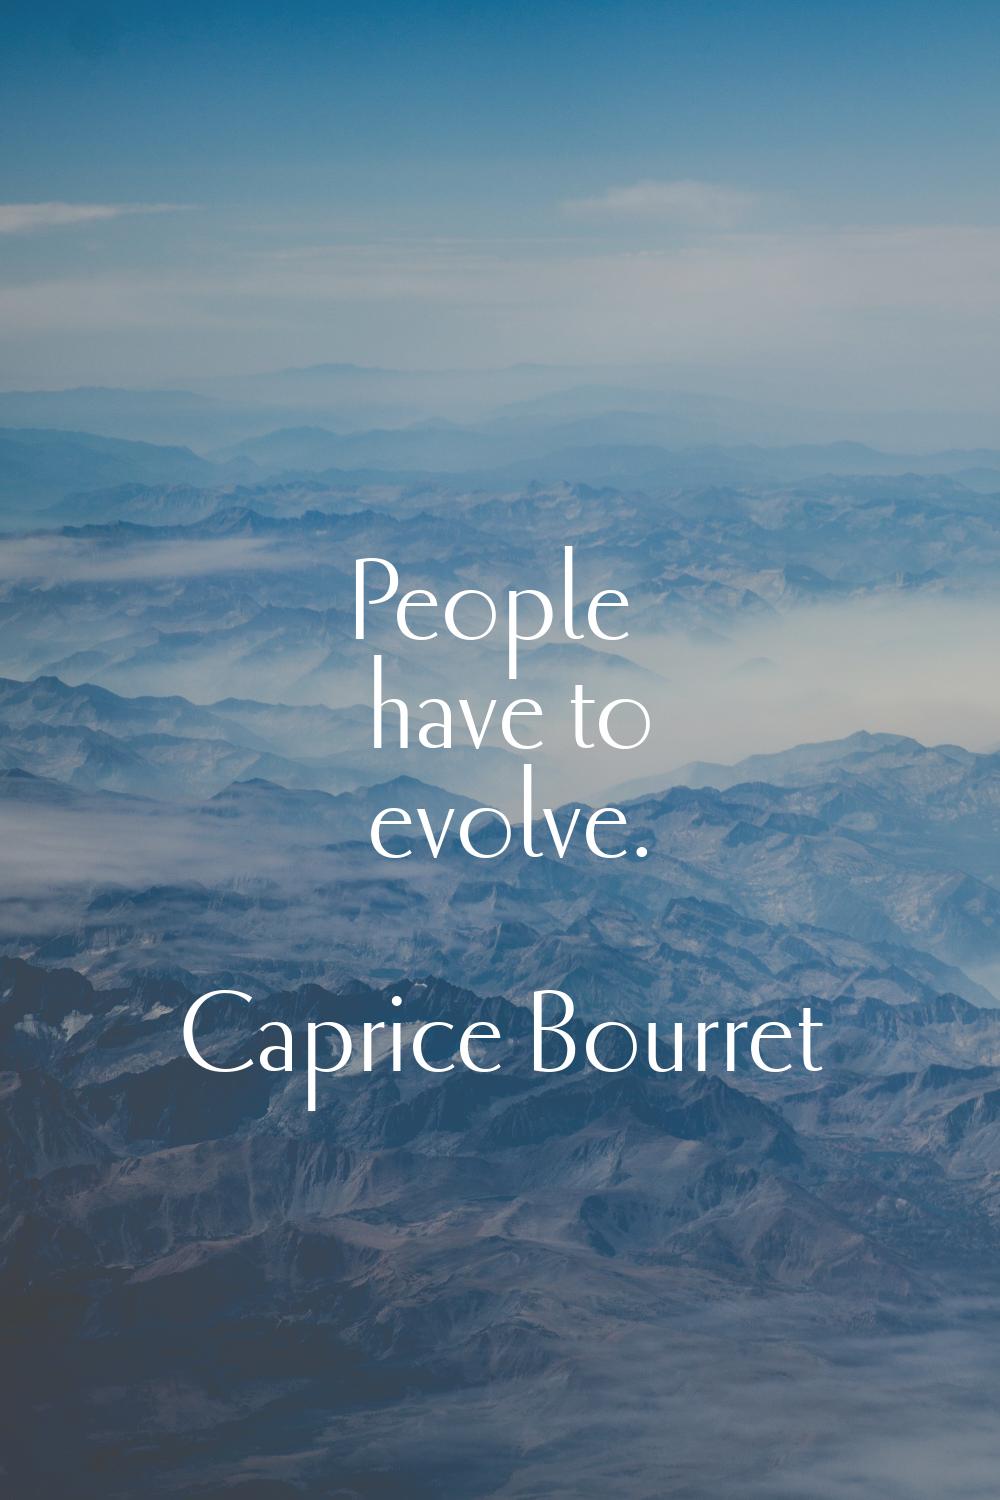 People have to evolve.